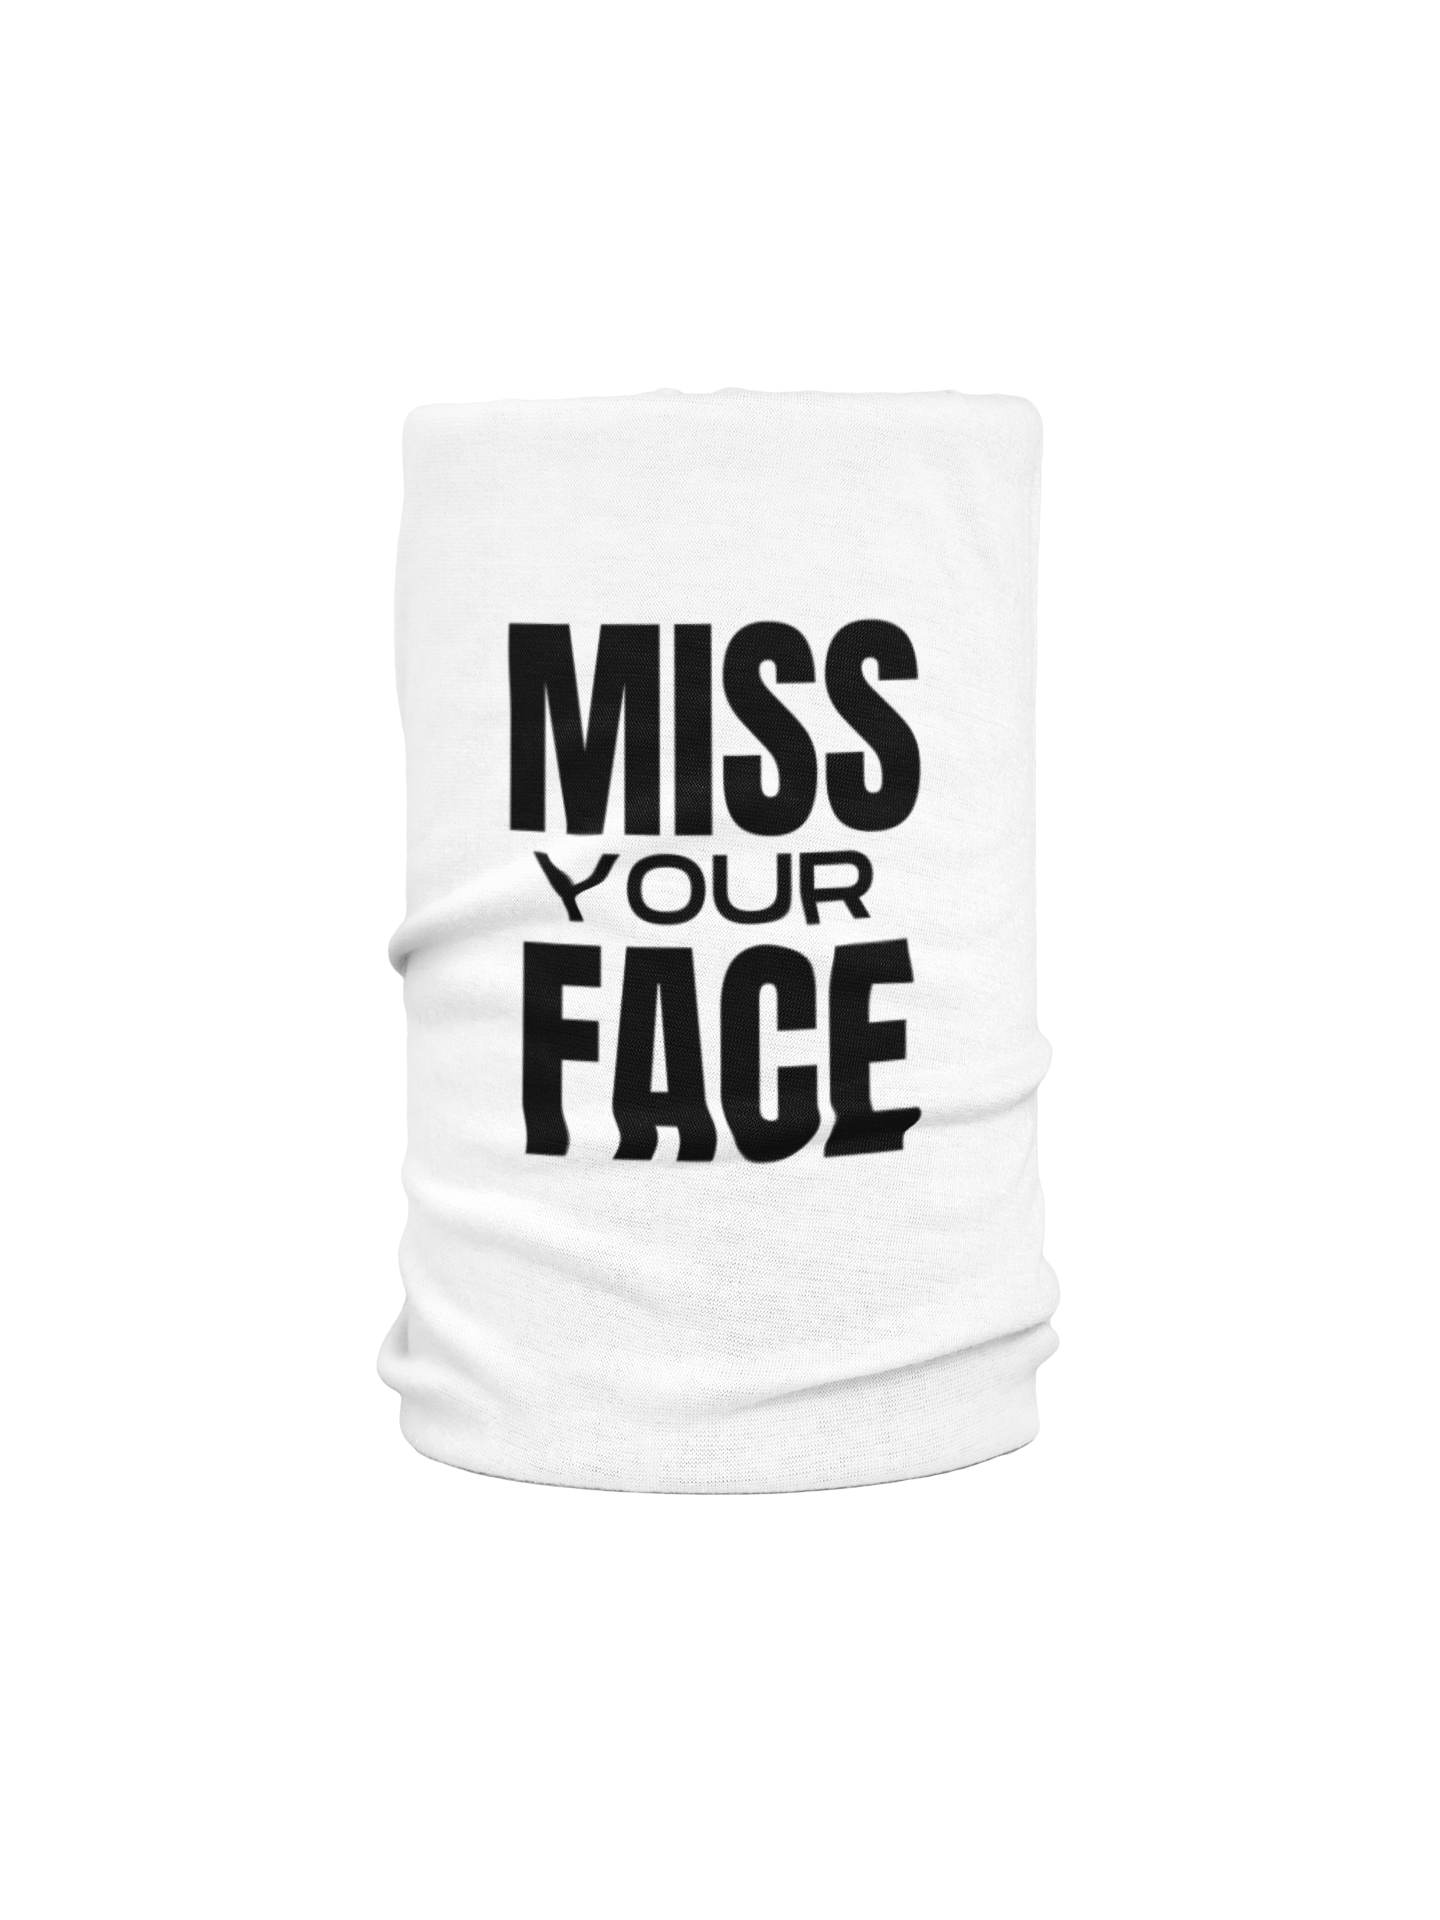 Miss Your Face Mask Pandemic Social Distance Missing Friends Funny Saying  Neck Gaiter -